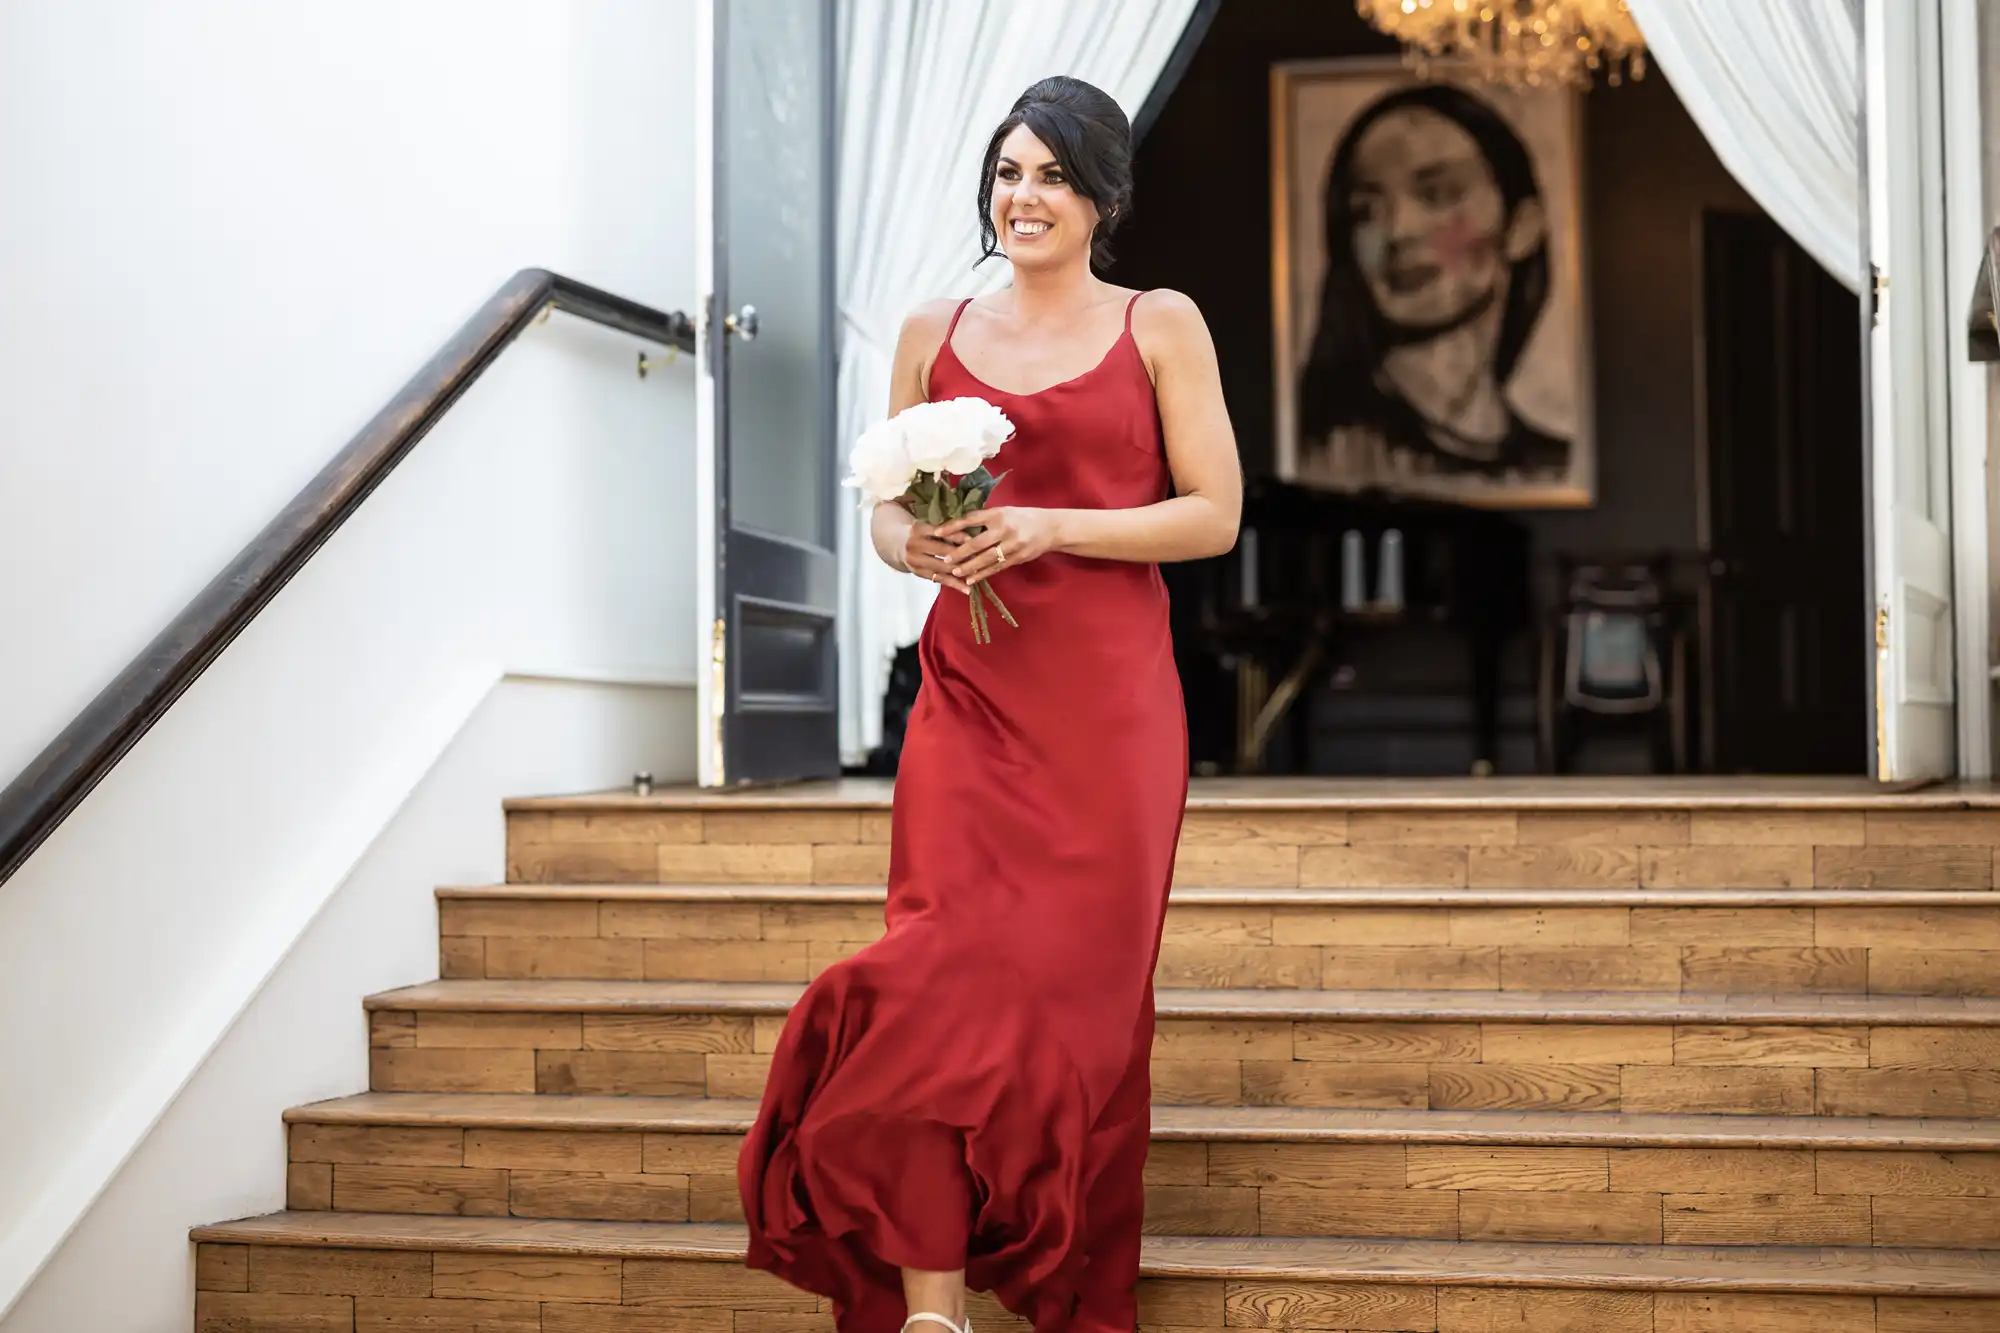 A woman in a red dress holding a bouquet of white flowers walks down wooden stairs, with a large portrait and chandelier visible in the background.